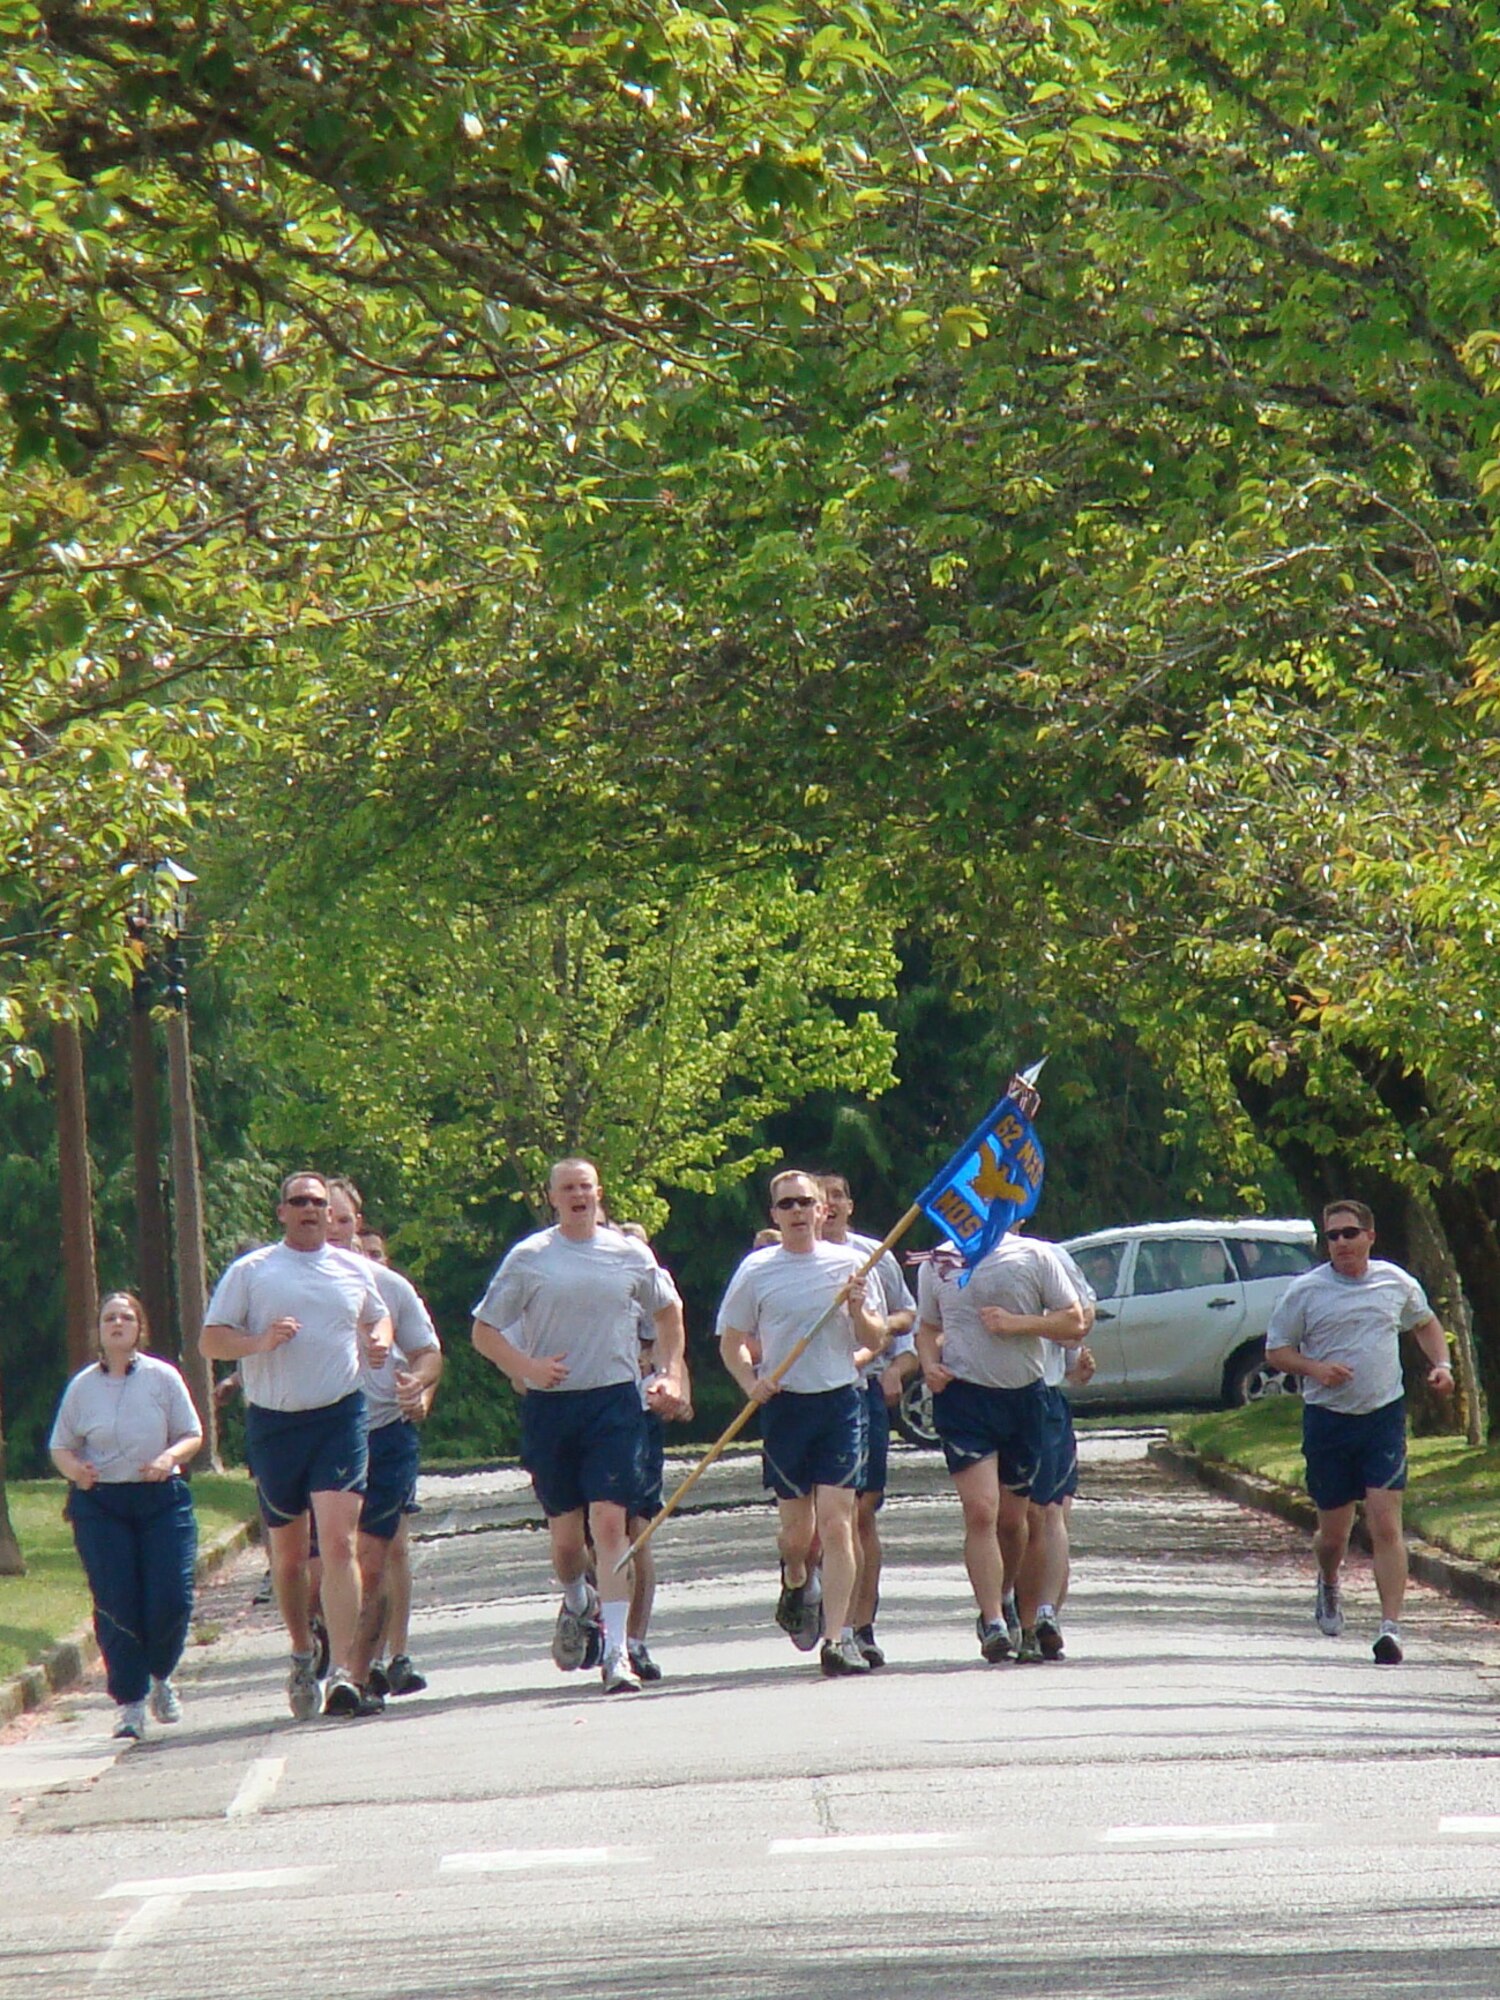 Members of the 62nd Maintenance Operations Squadron run in formation May 10, 2013 during Wingman Day at Joint Base Lewis-McChord, Wash. This was the squadron's last run together before its deactivation on May 13, 2013. (Courtesy photo)